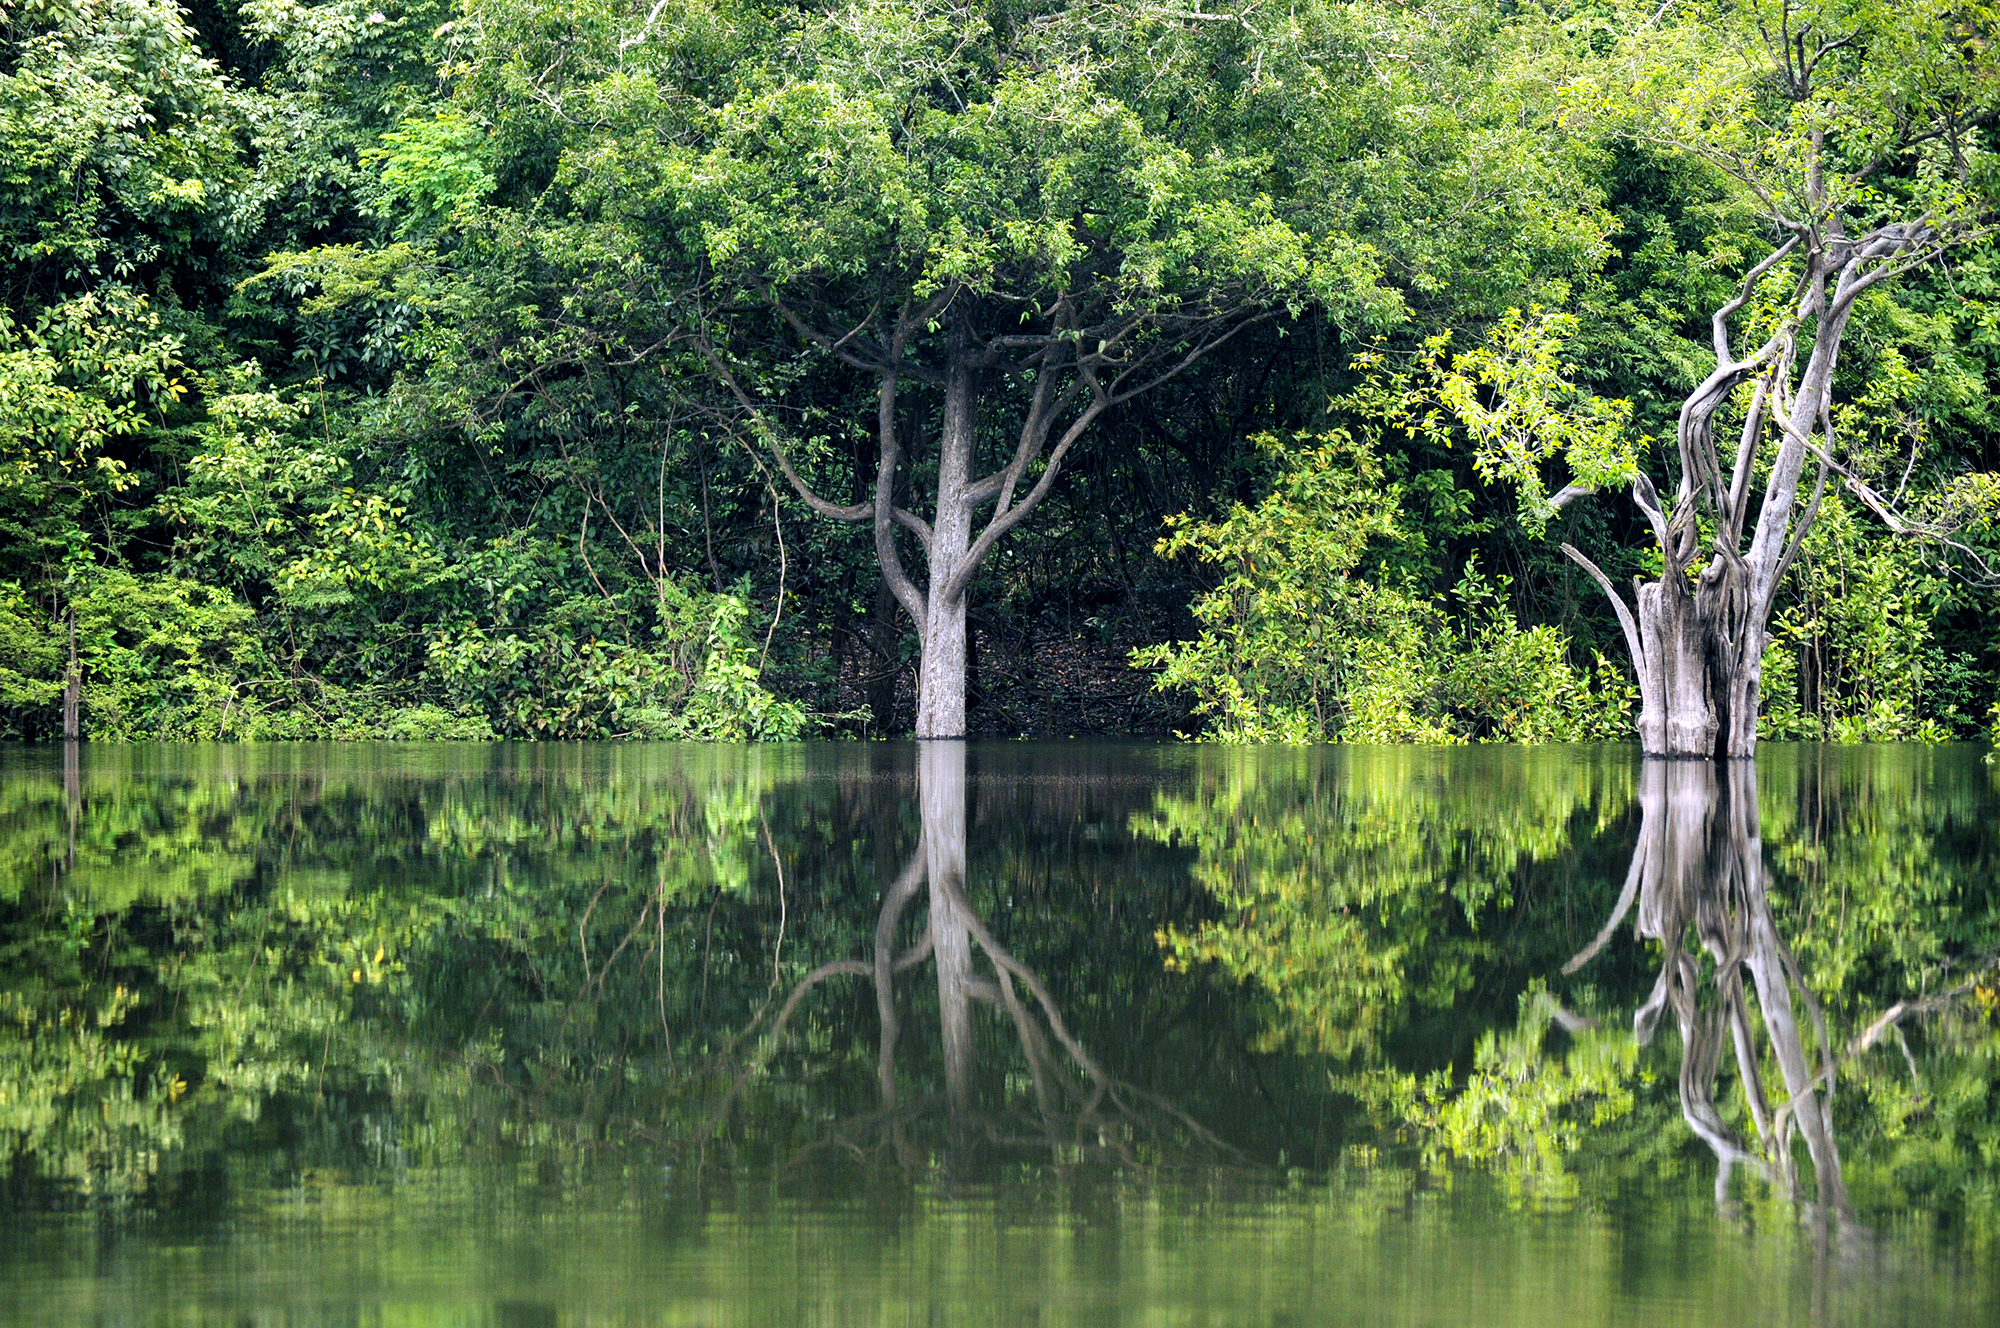 Trees with green leaves are shown surrounded by water of the Amazon river. The reflections of the trees can be seen in the water.